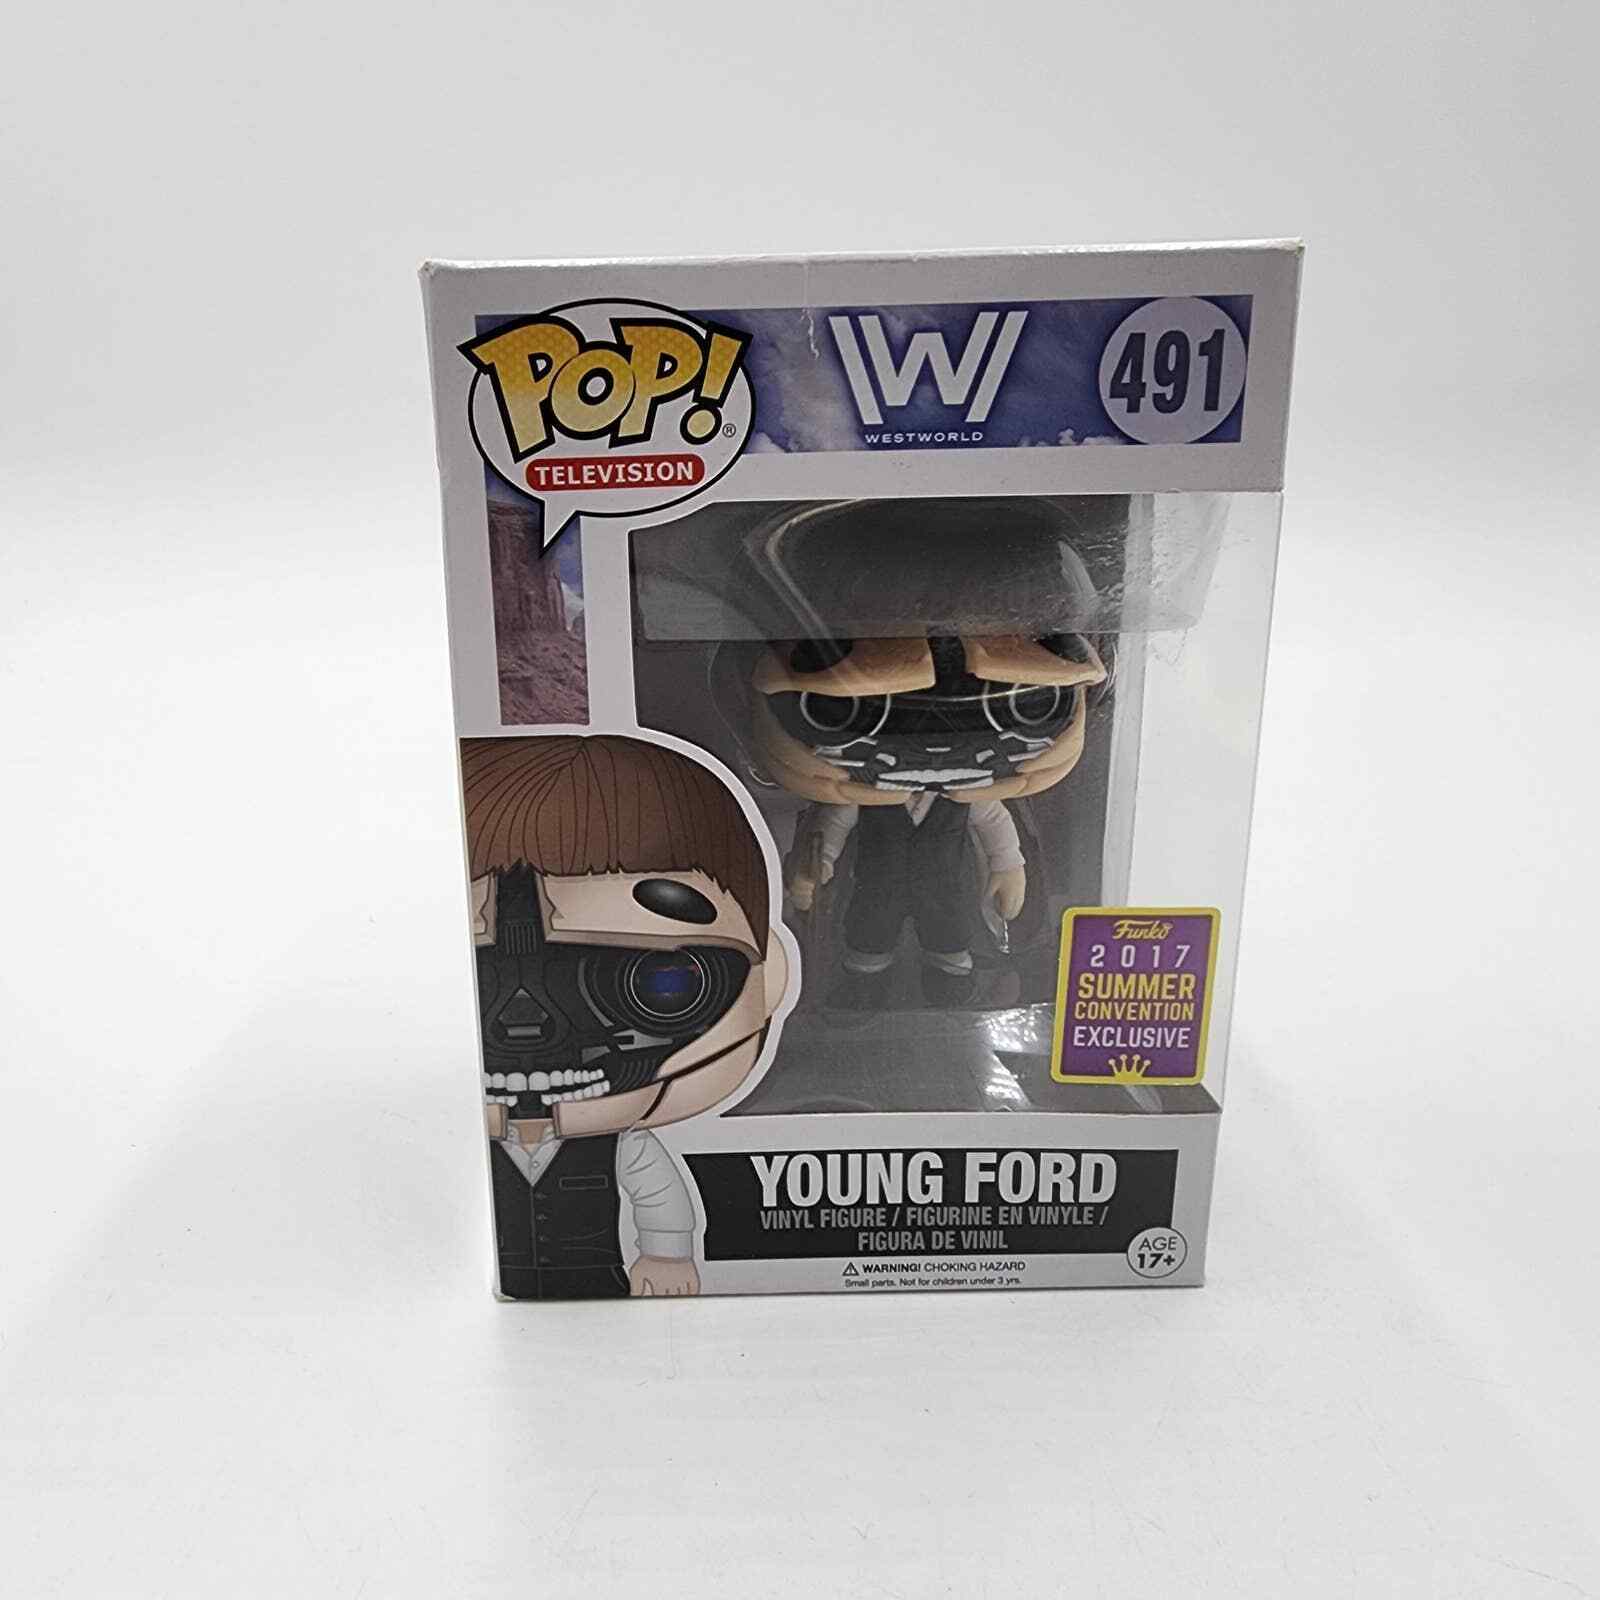 Funko Pop Television Westwood Young Ford 491 Robot 